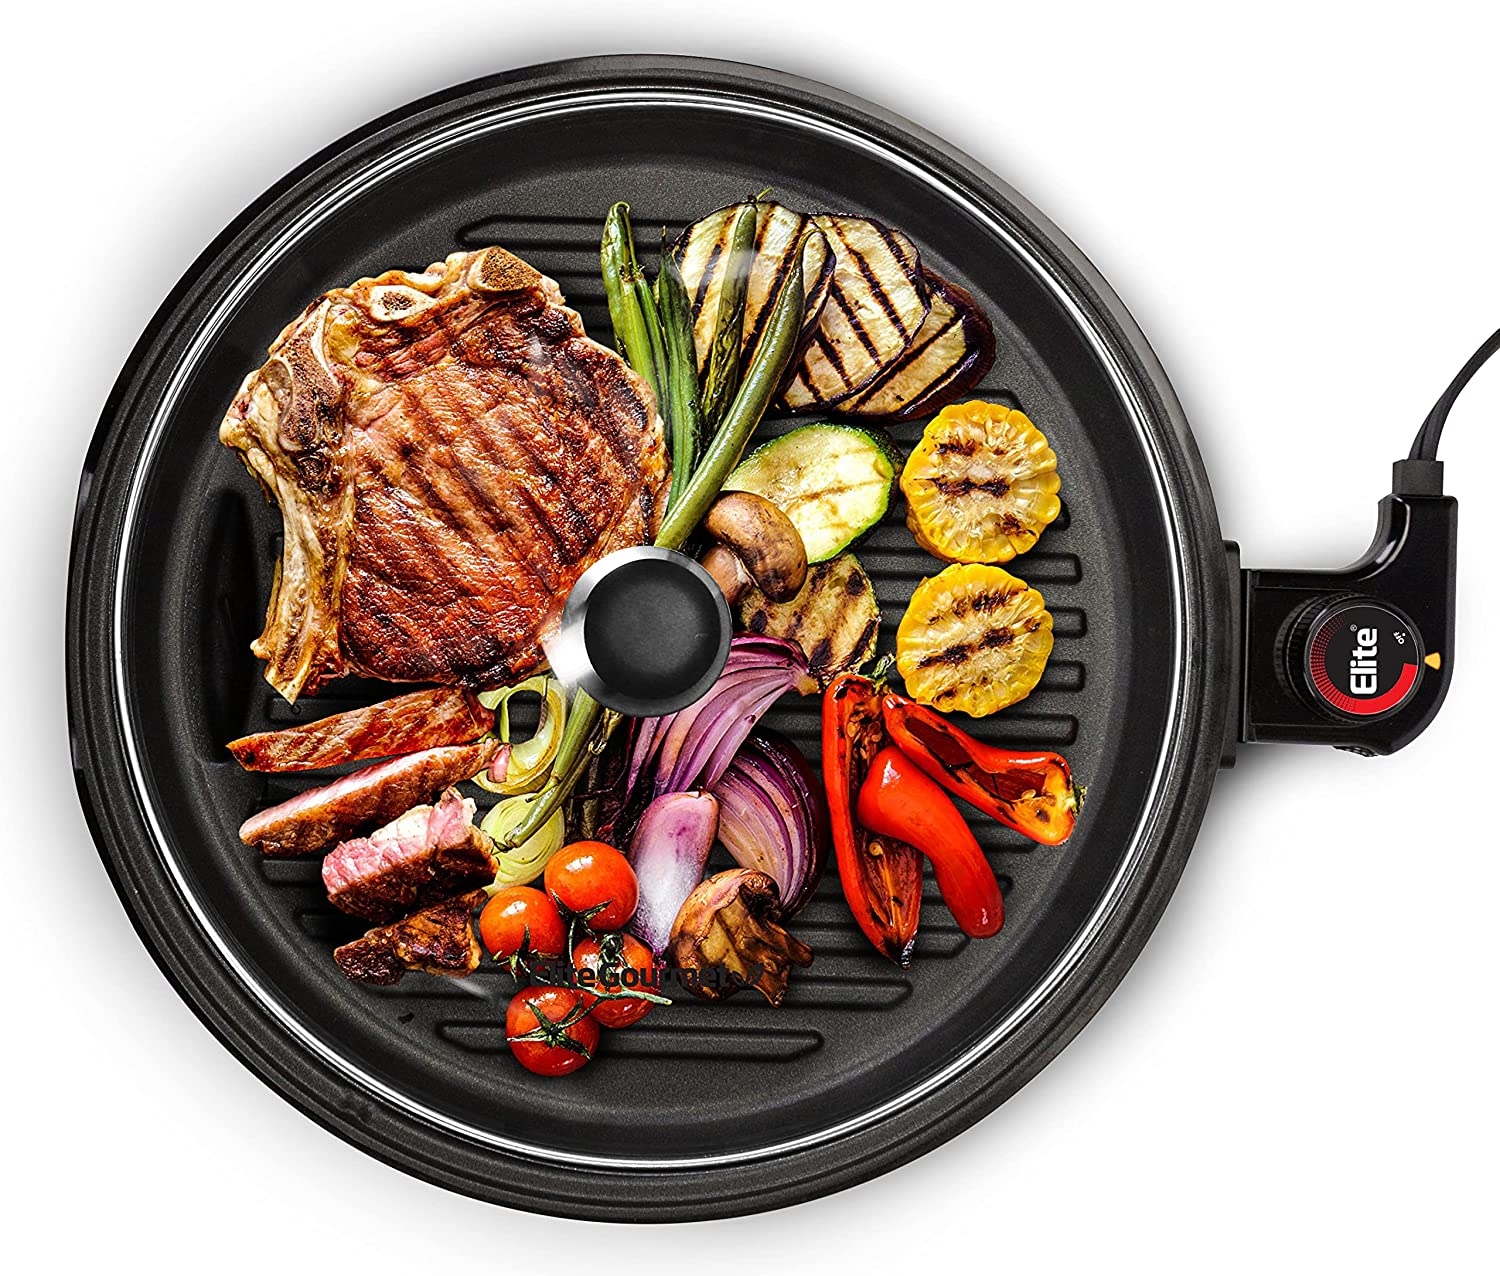 Elite Gourmet EMG-980B Smokeless Electric Tabletop Grill Nonstick, 6-Serving, Dishwasher Safe Removable Grilling Plate, Grill